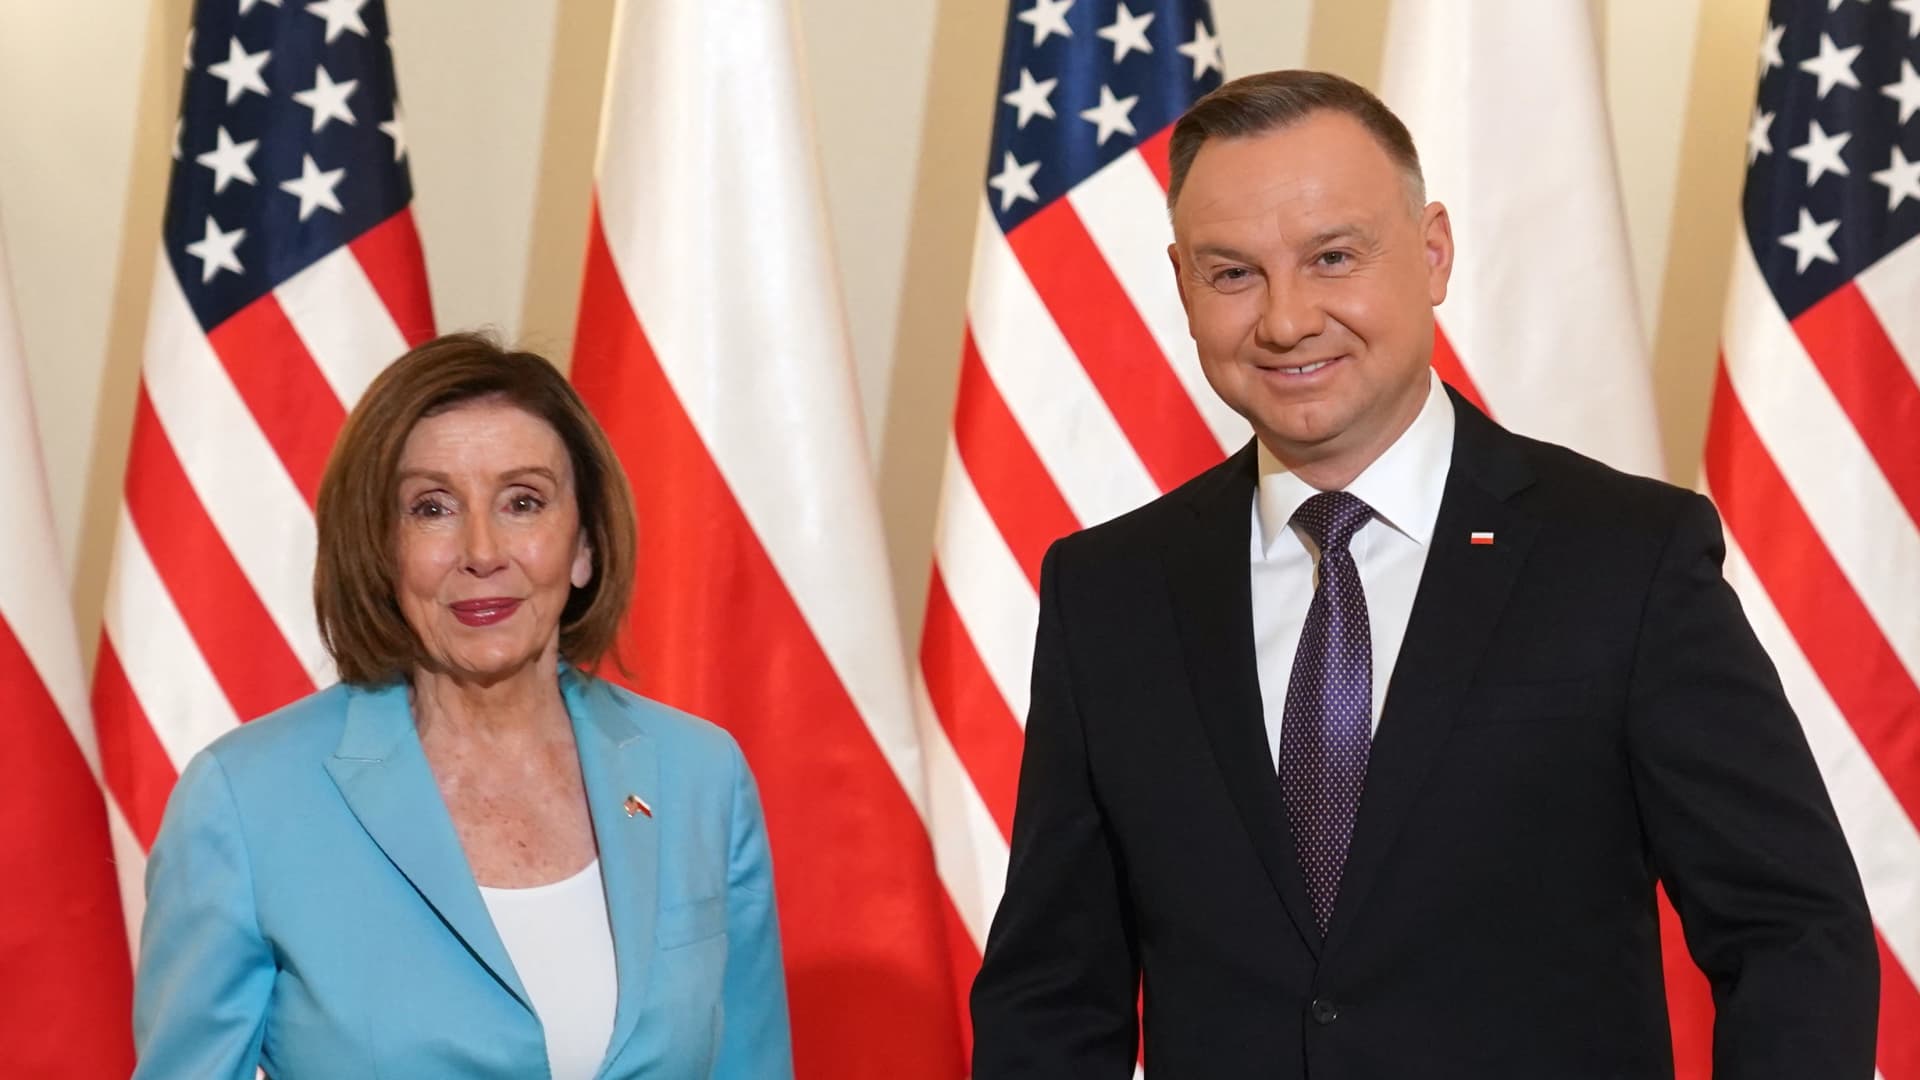 US Speaker of the House Nancy Pelosi stands next to Polish President Andrzej Duda as they meet in Warsaw on May 2, 2022.